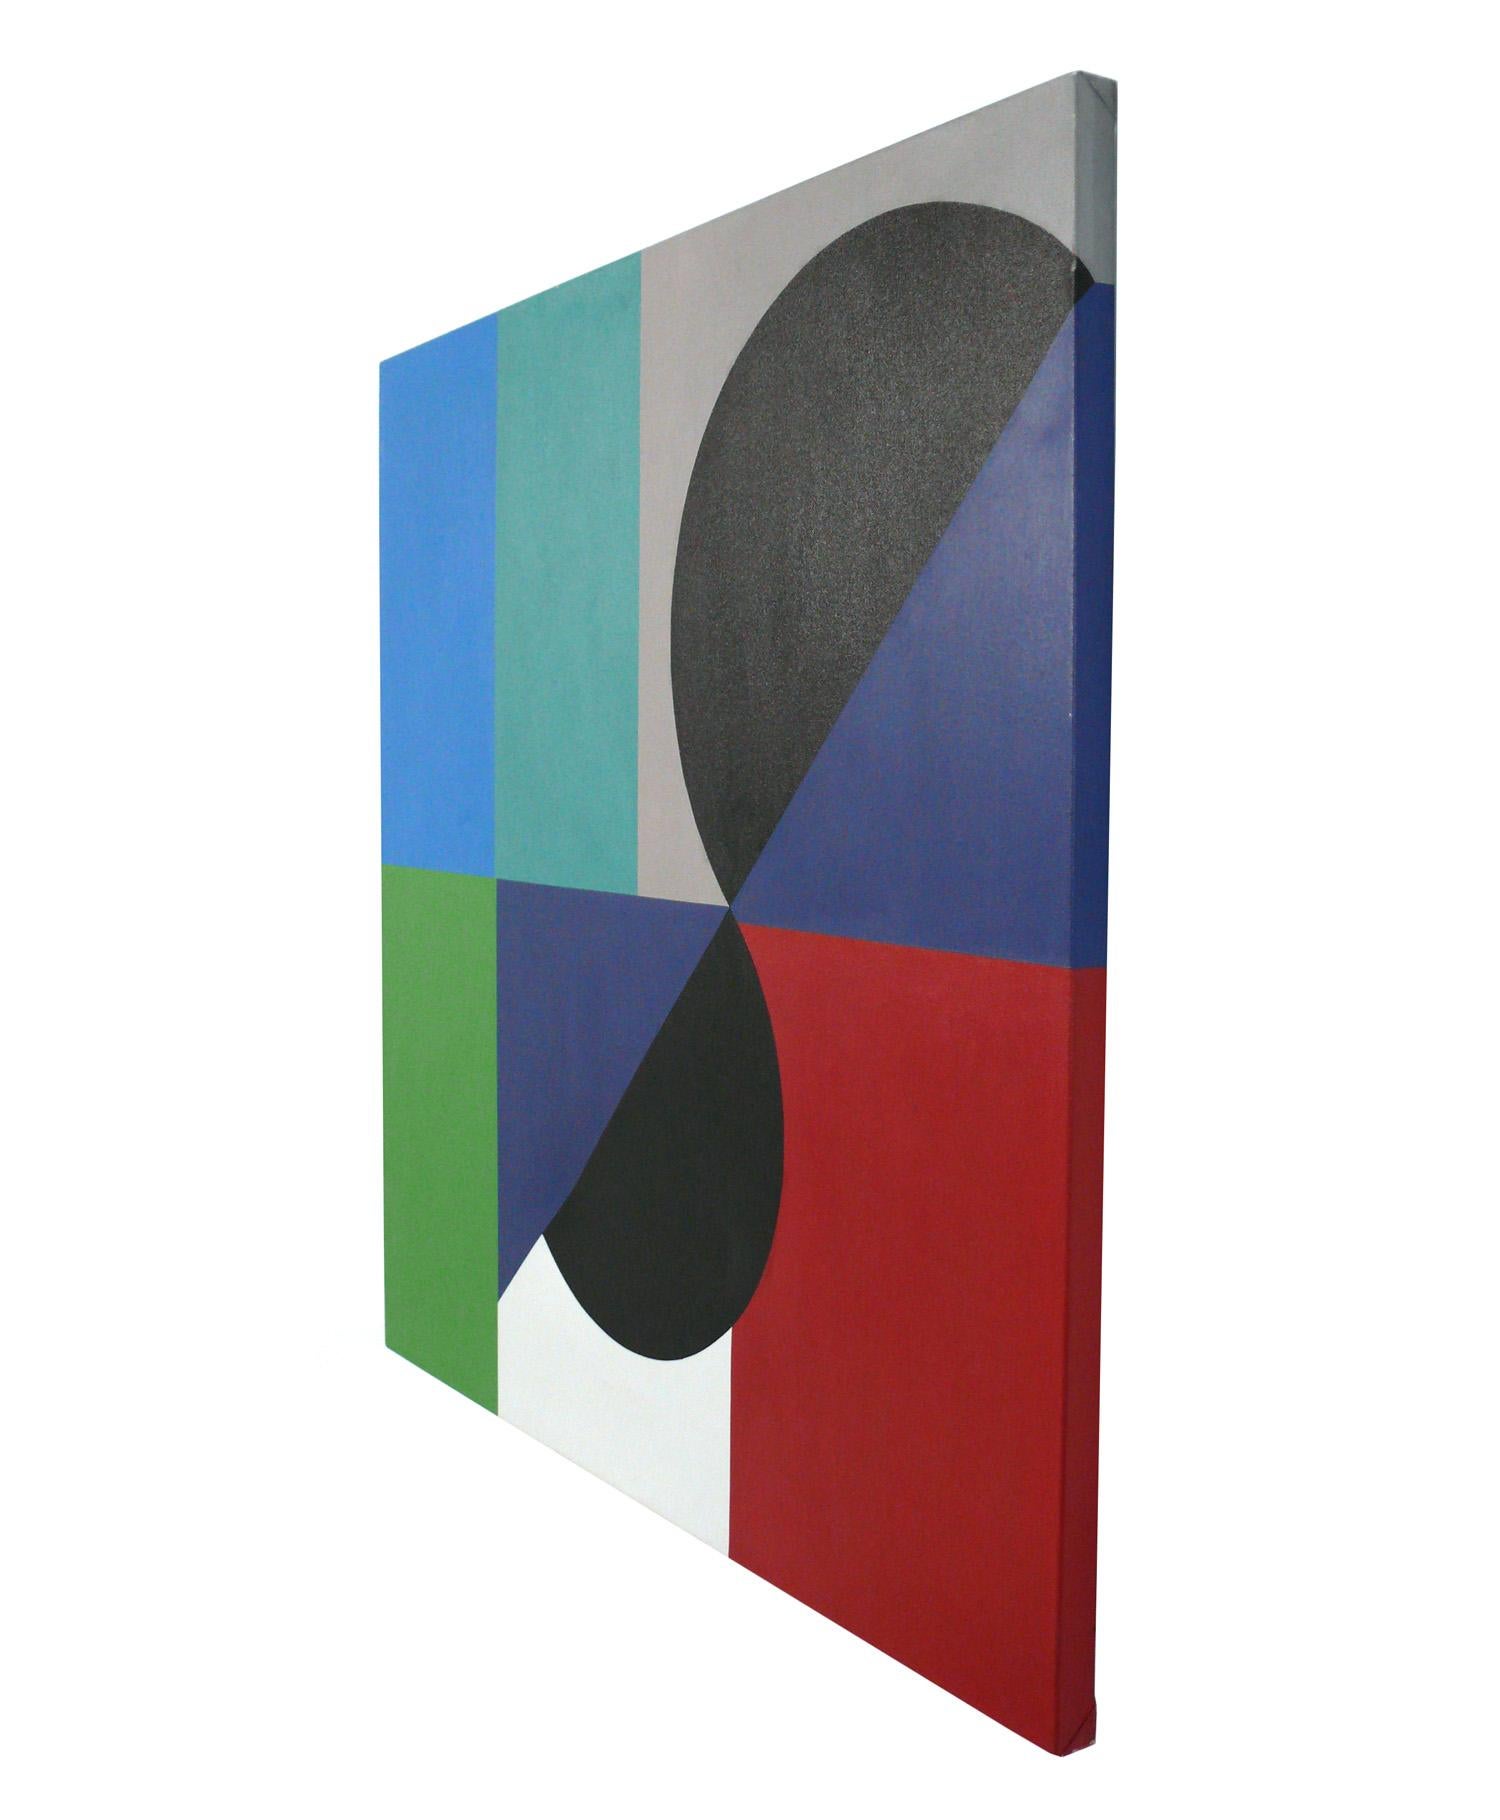 Large Scale Abstract Painting, in the style of Sonia Delaunay, actual artist unknown, American, circa 1990s. This painting packs a lot of colorful graphic punch and measures an impressive 48